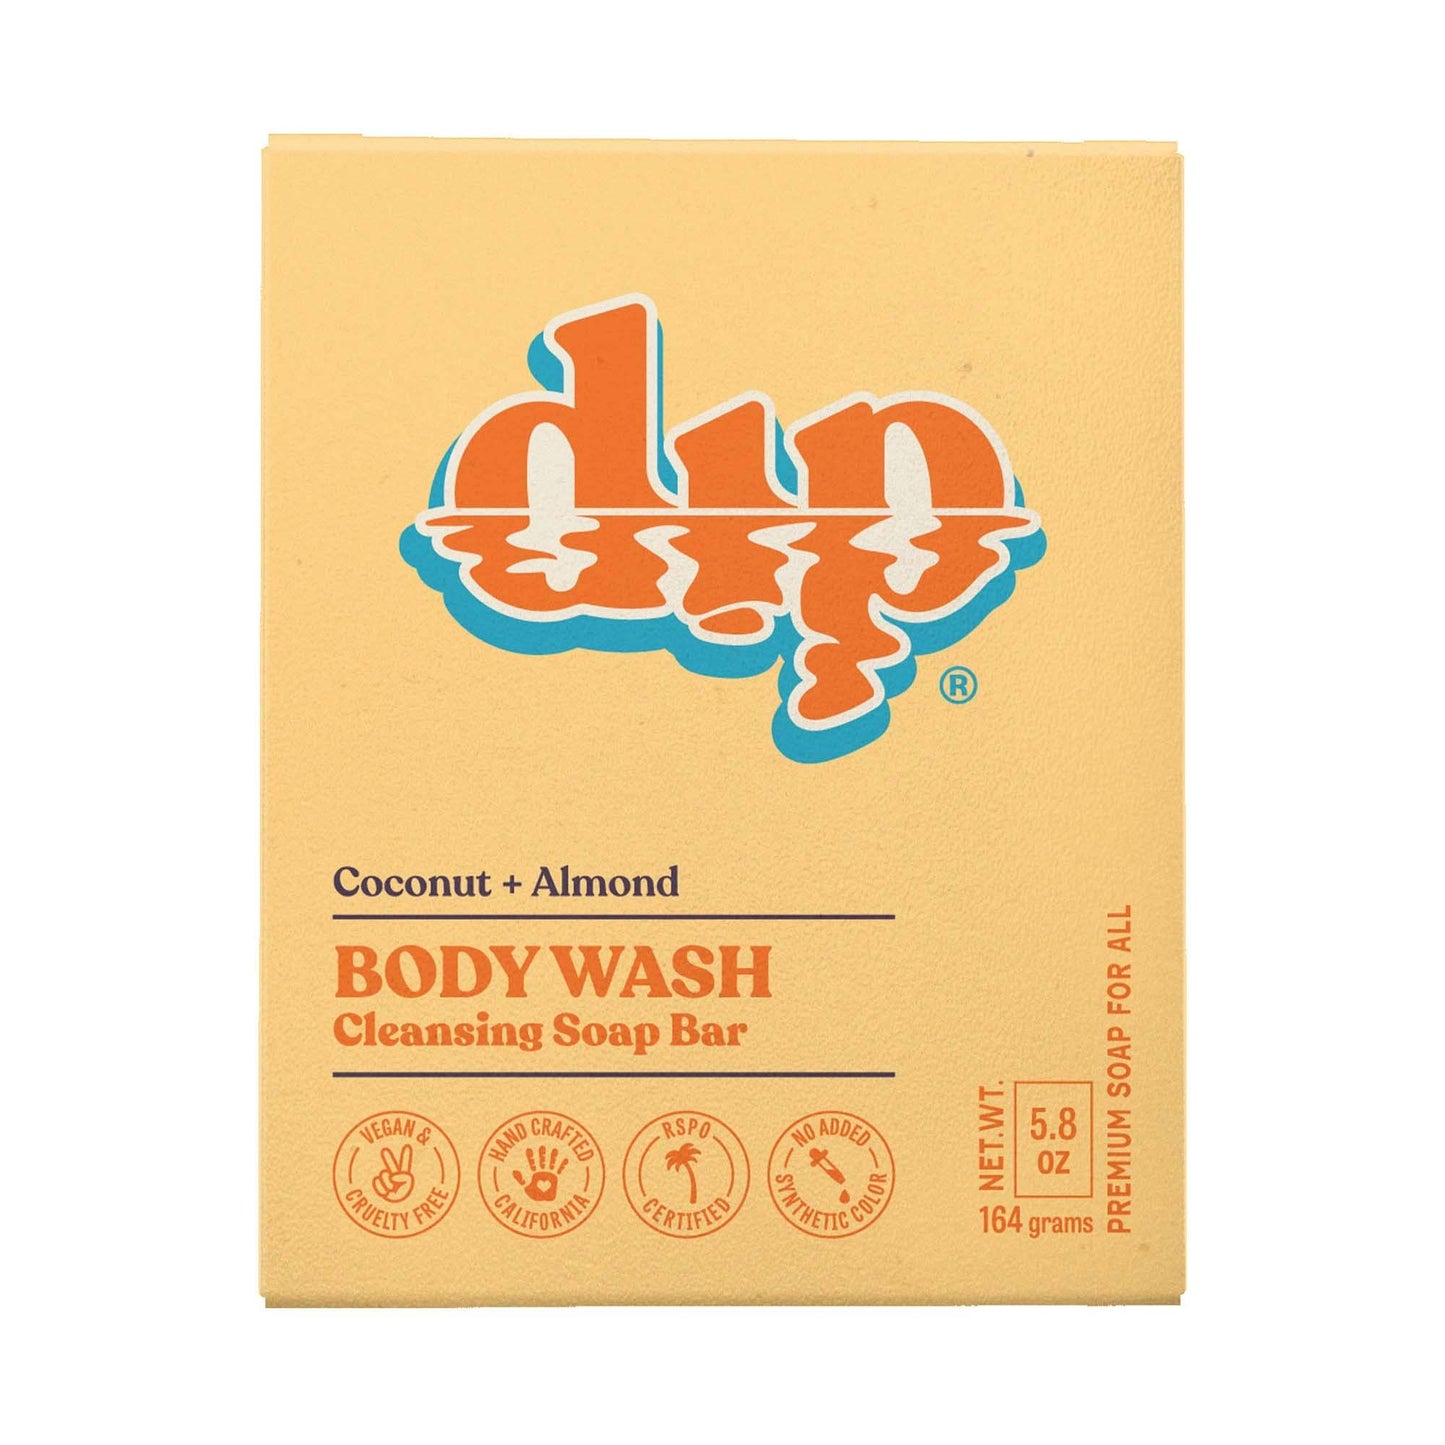 Dip - Body Wash Cleansing Soap Bar - Coconut & Almond